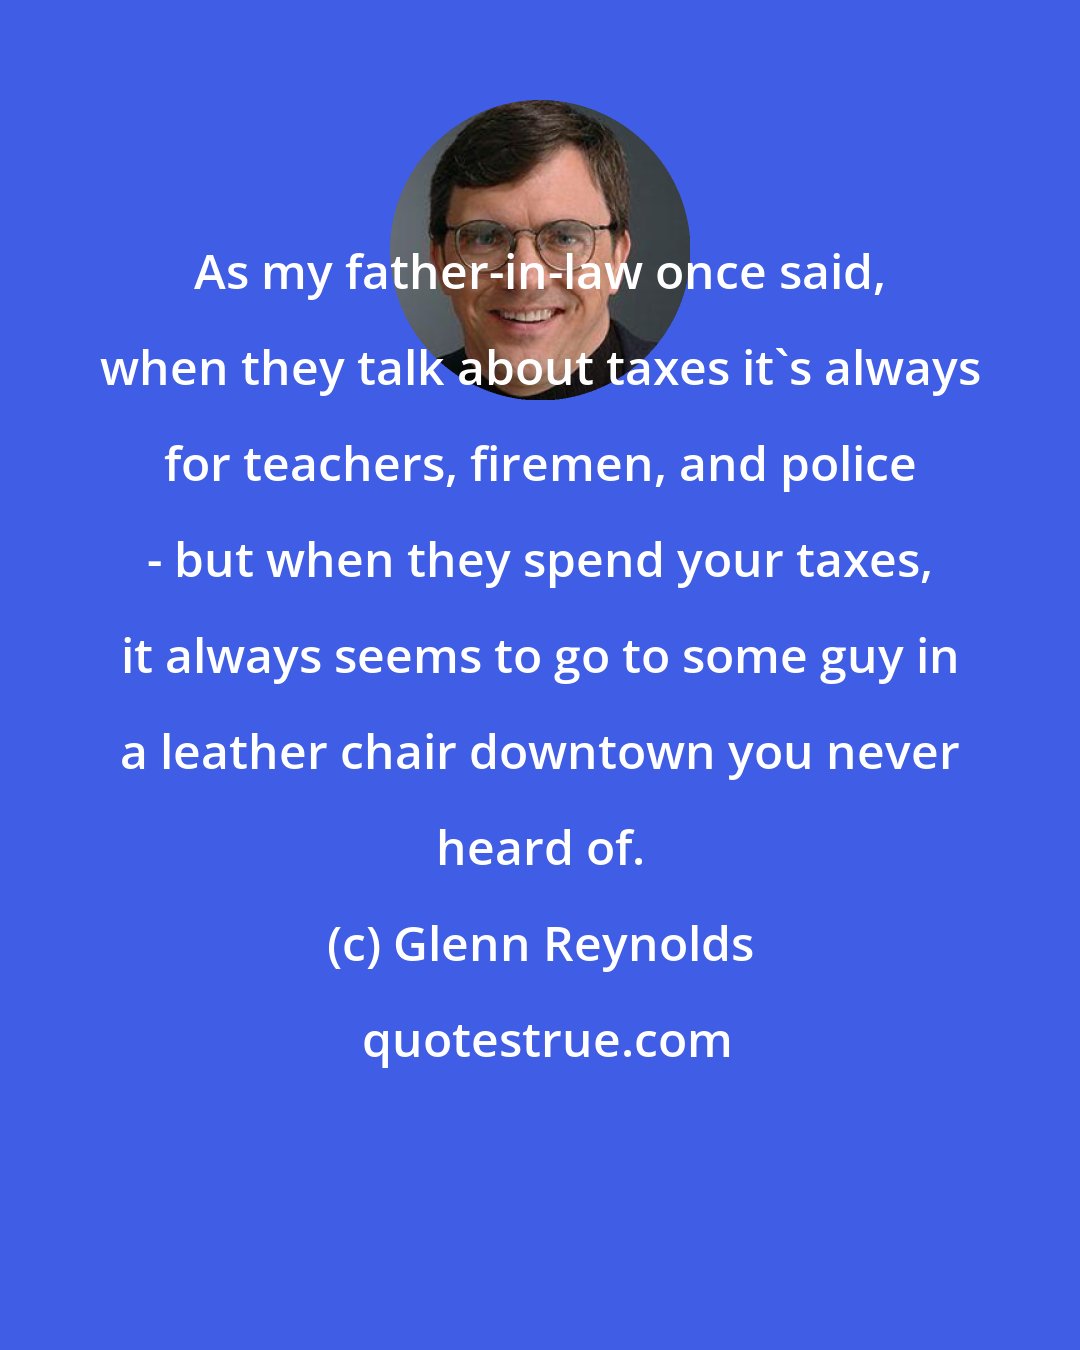 Glenn Reynolds: As my father-in-law once said, when they talk about taxes it's always for teachers, firemen, and police - but when they spend your taxes, it always seems to go to some guy in a leather chair downtown you never heard of.